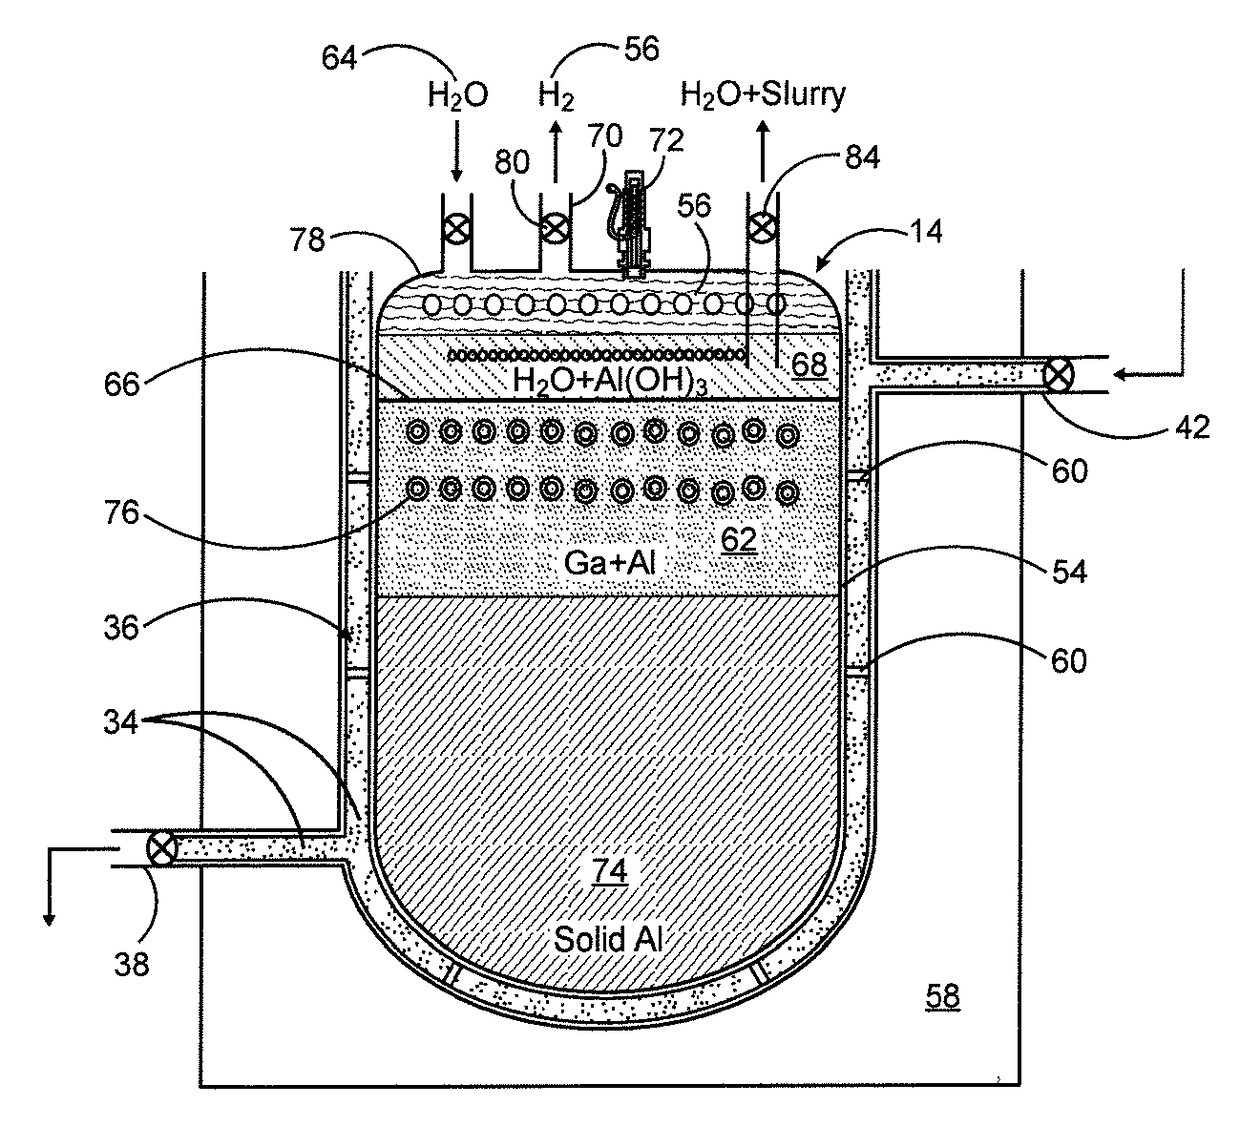 Selectively locatable power generation system employing a water splitting process